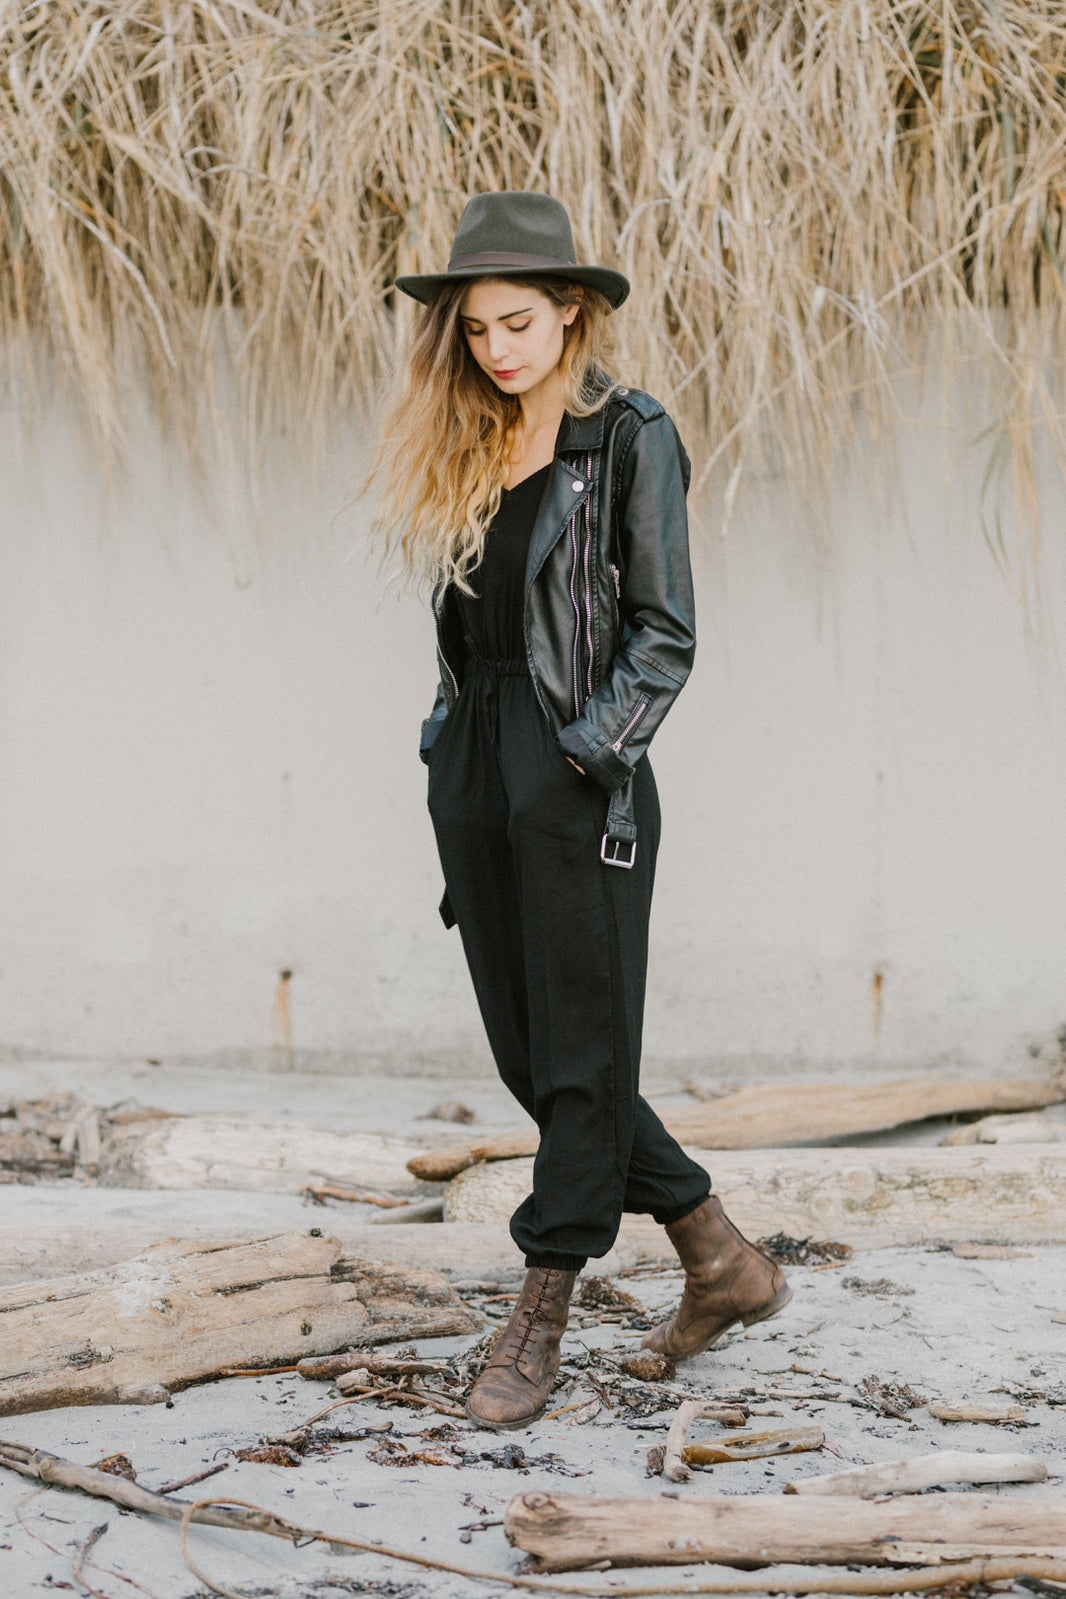 All Rompers + Jumpsuits - Bohemian Style - Ethical | by Poème Clothing